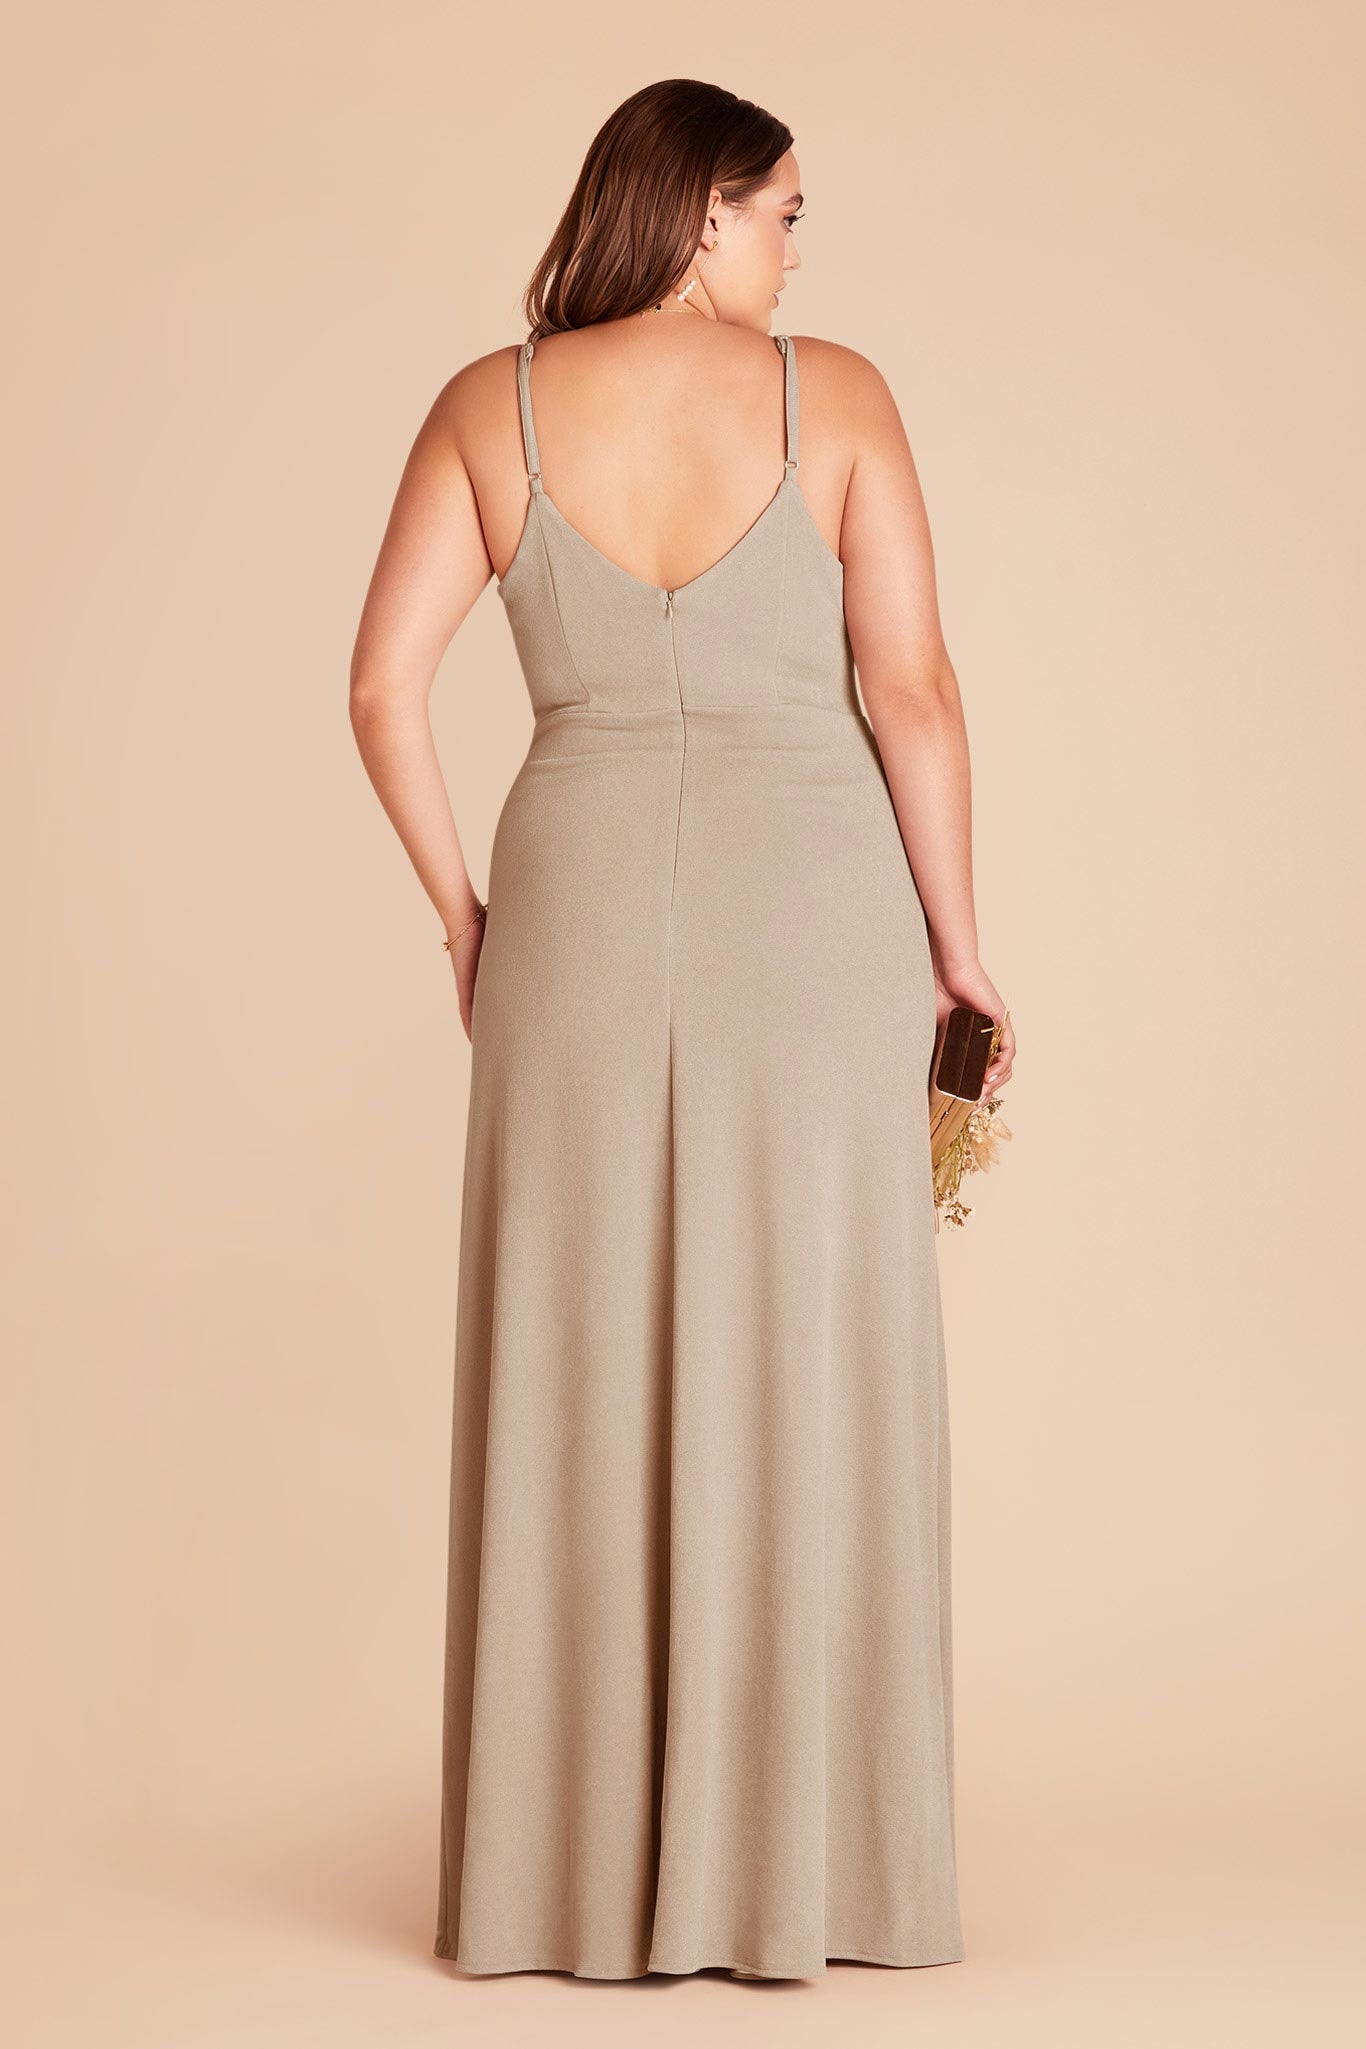 Almond Jay Convertible Crepe Dress by Birdy Grey